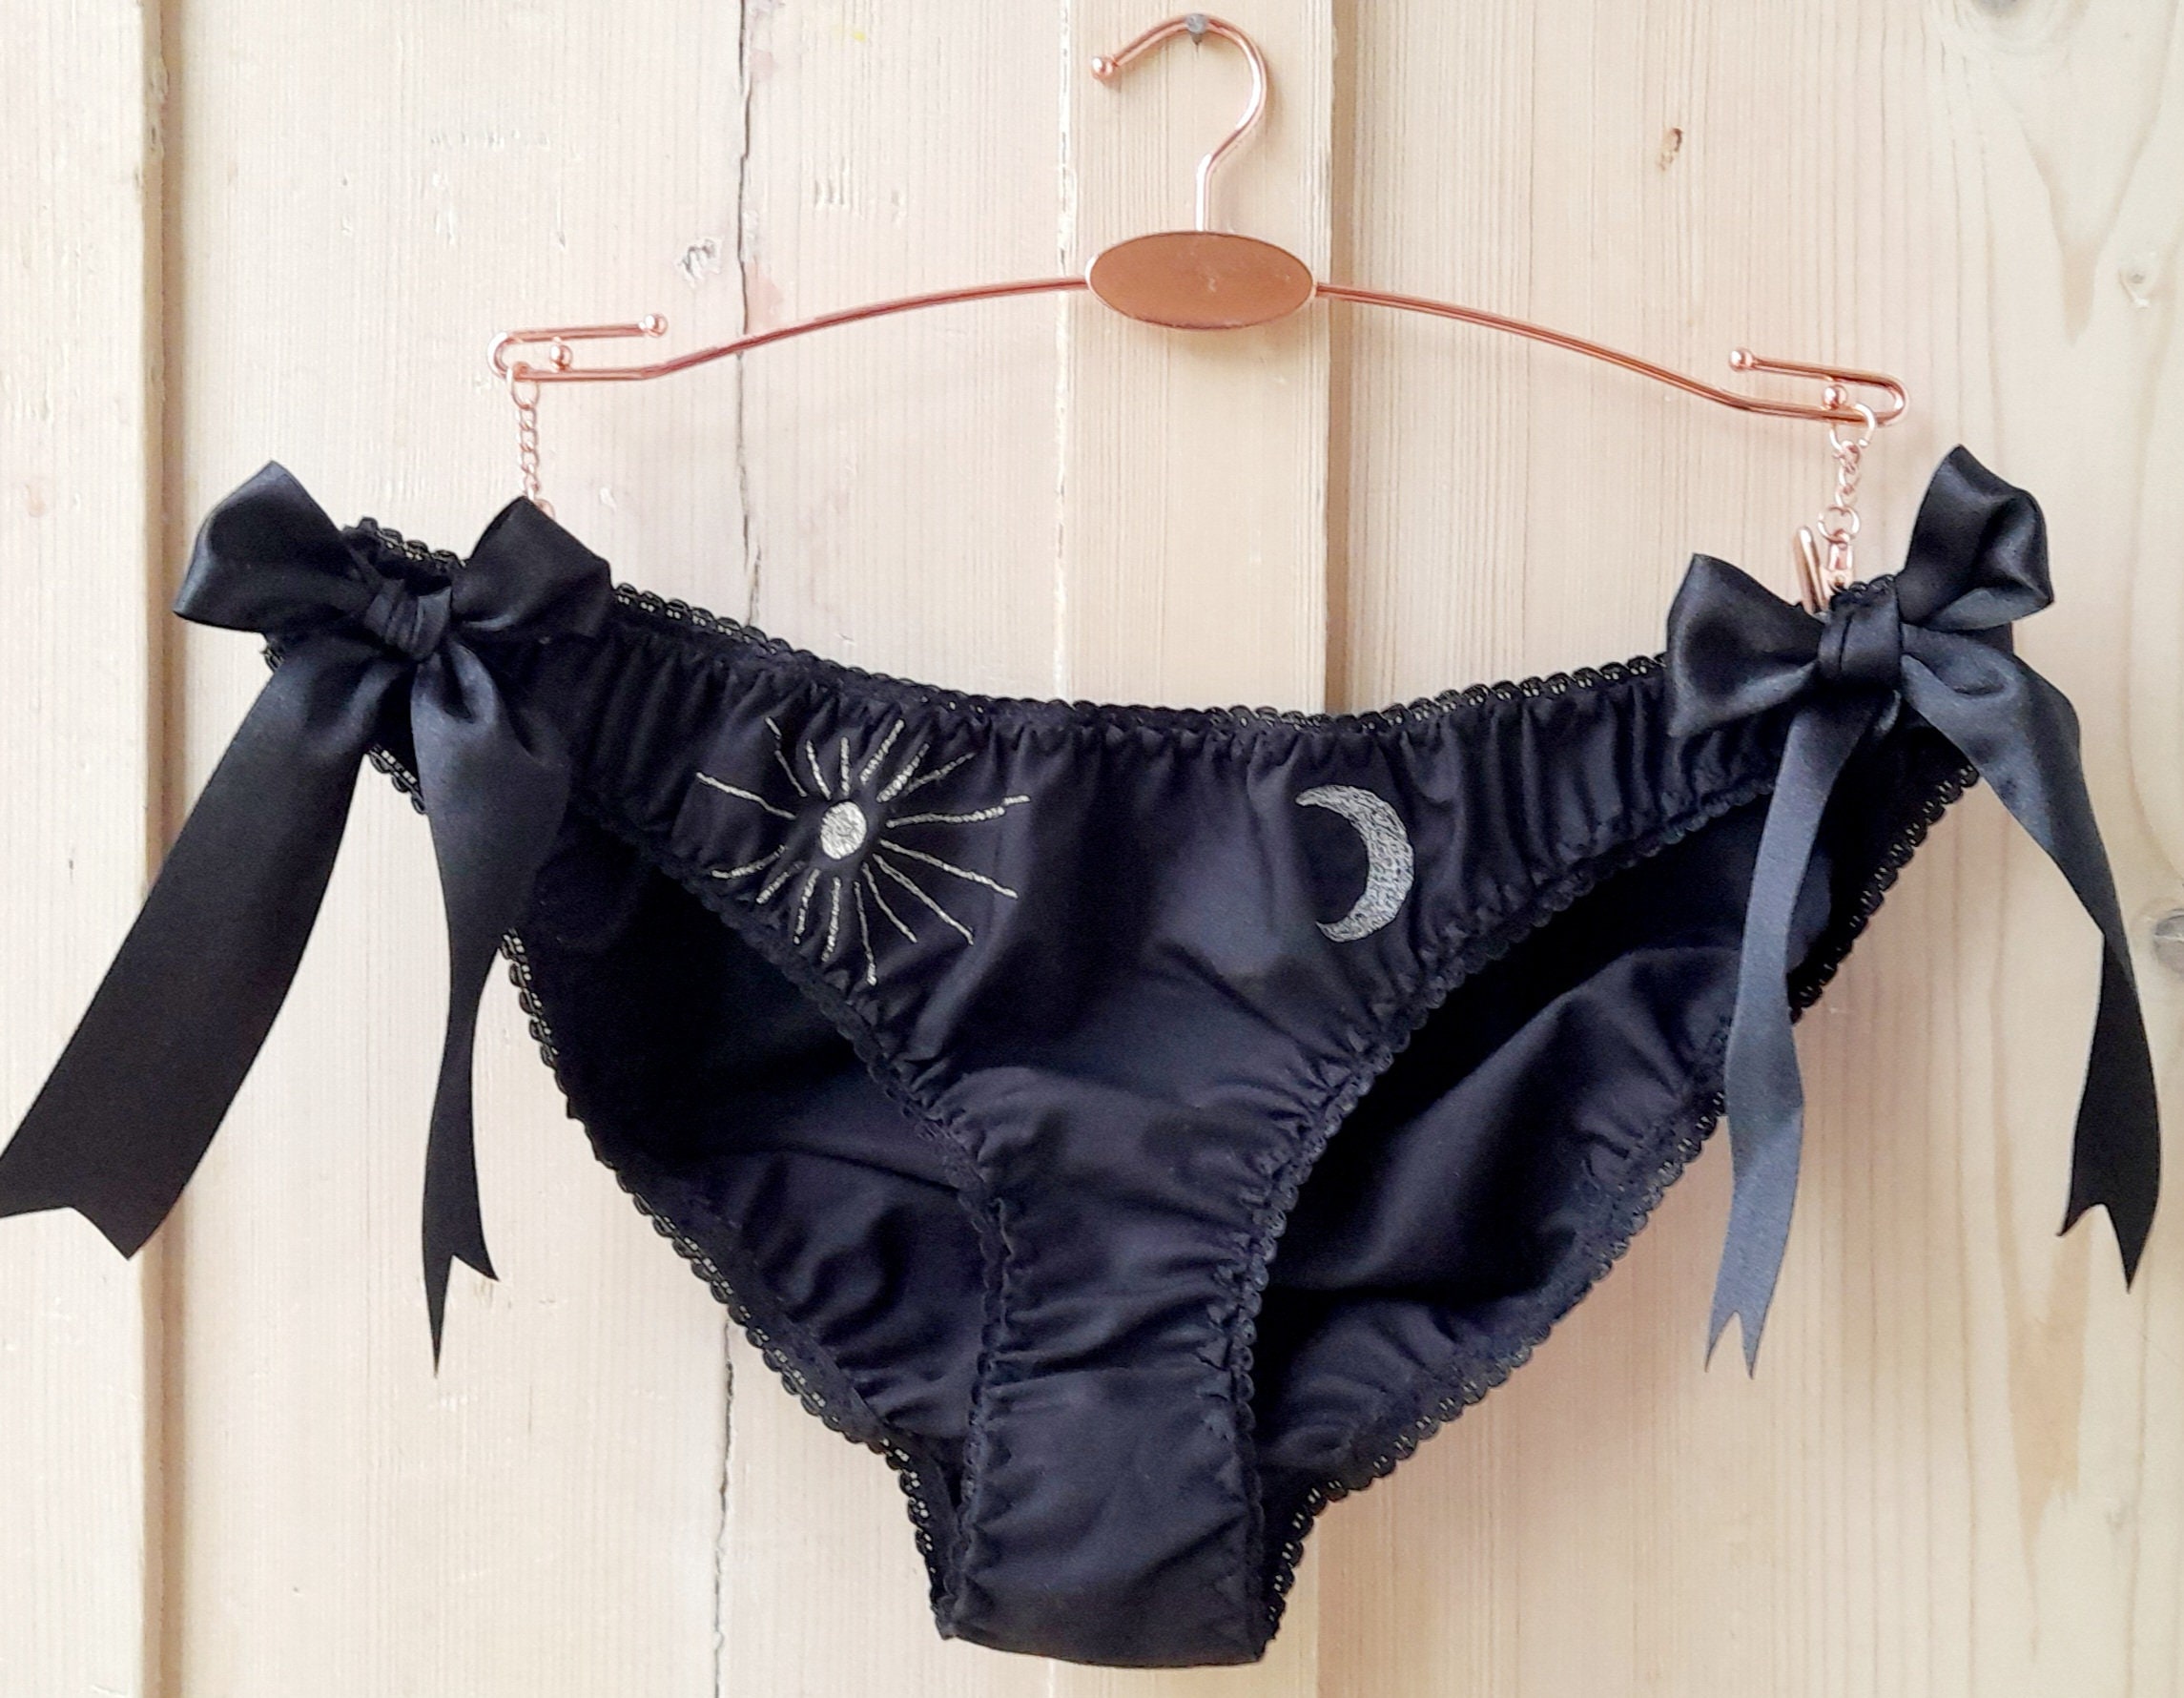 Black Sparkly Soft Lace Lingerie Set/ Black and Gold Lace Bralette and Low  Waist Lace Knickers/ Bespoke Sparkly Underwear 